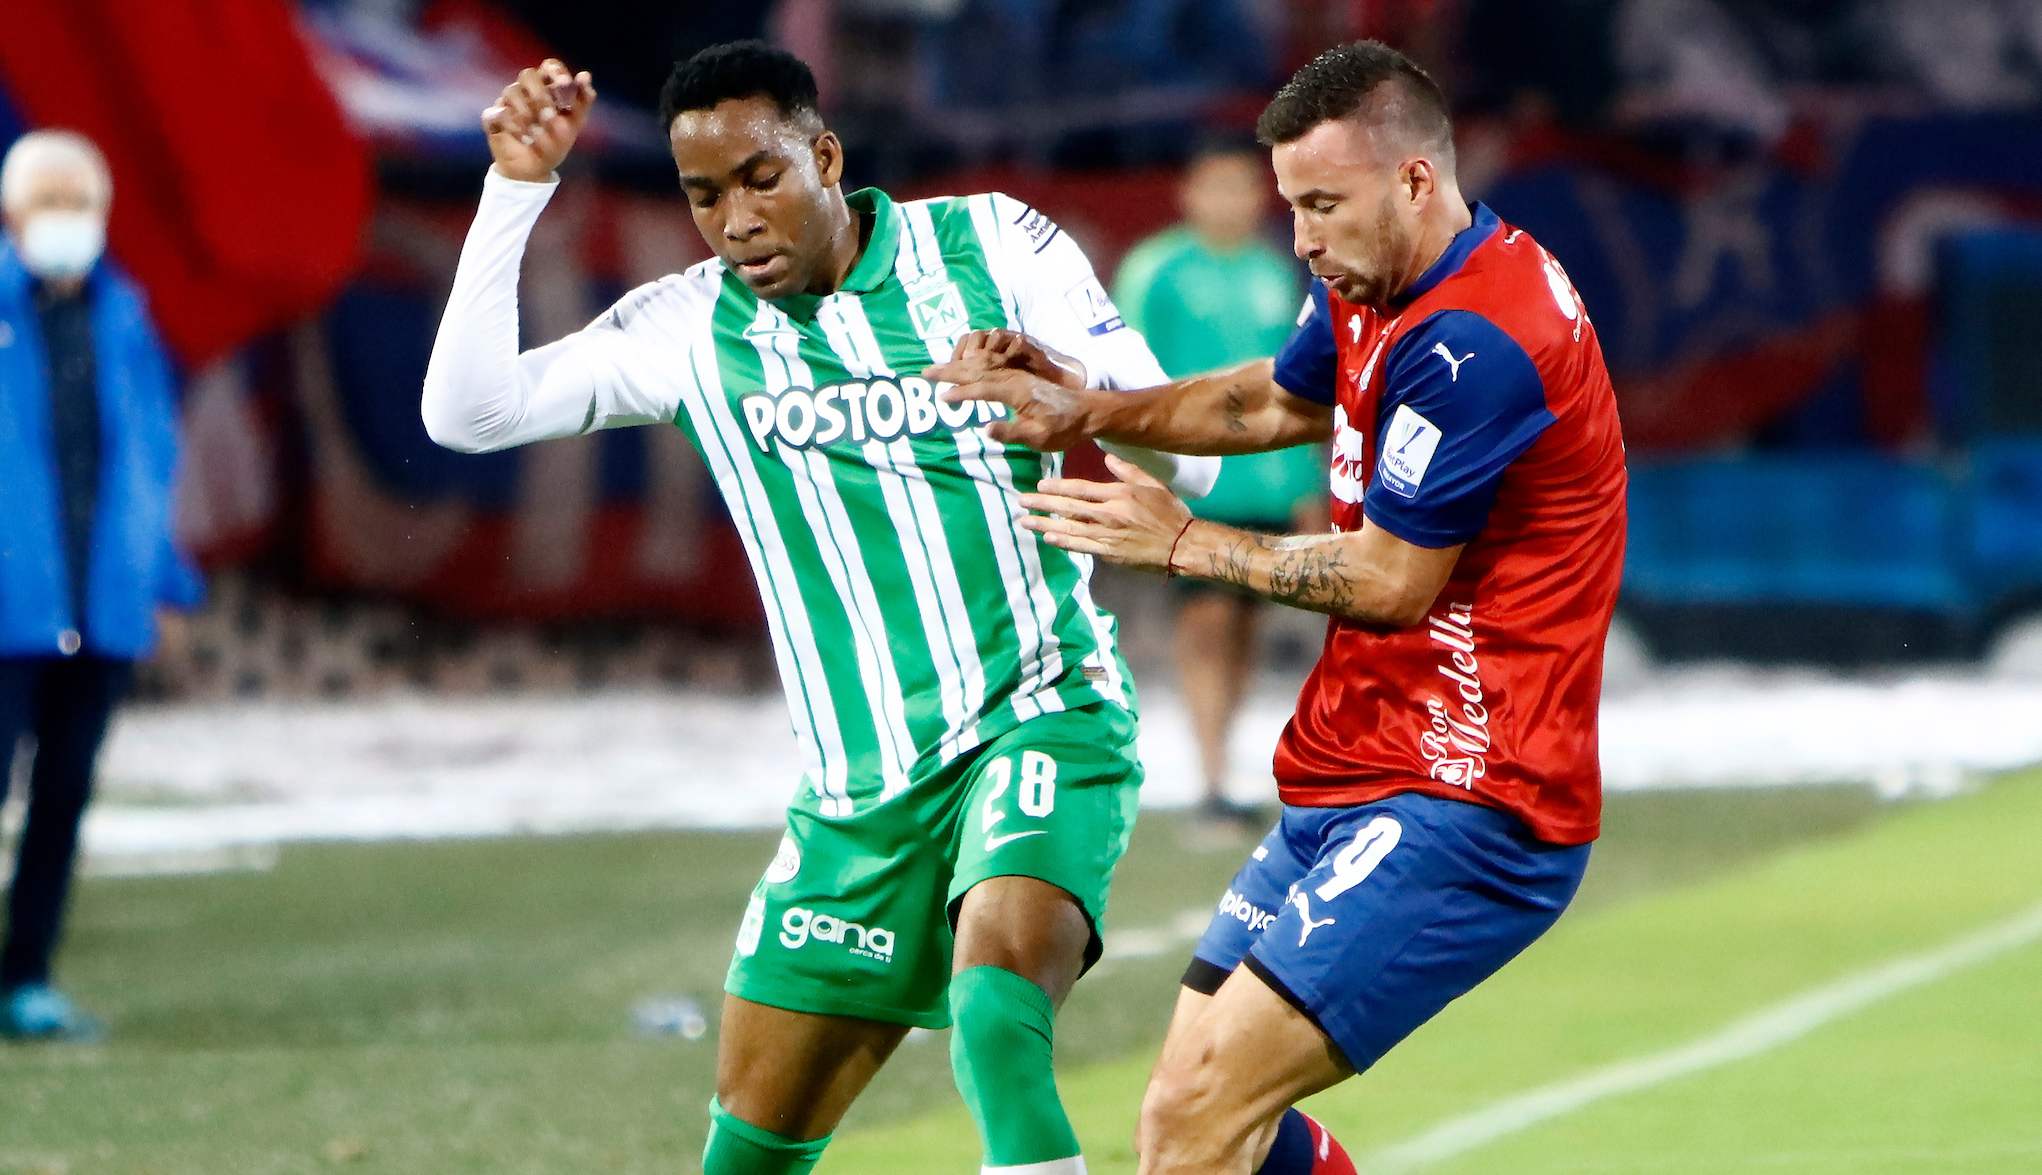 Atlético Nacional defeated DIM with authority in the paisa classic